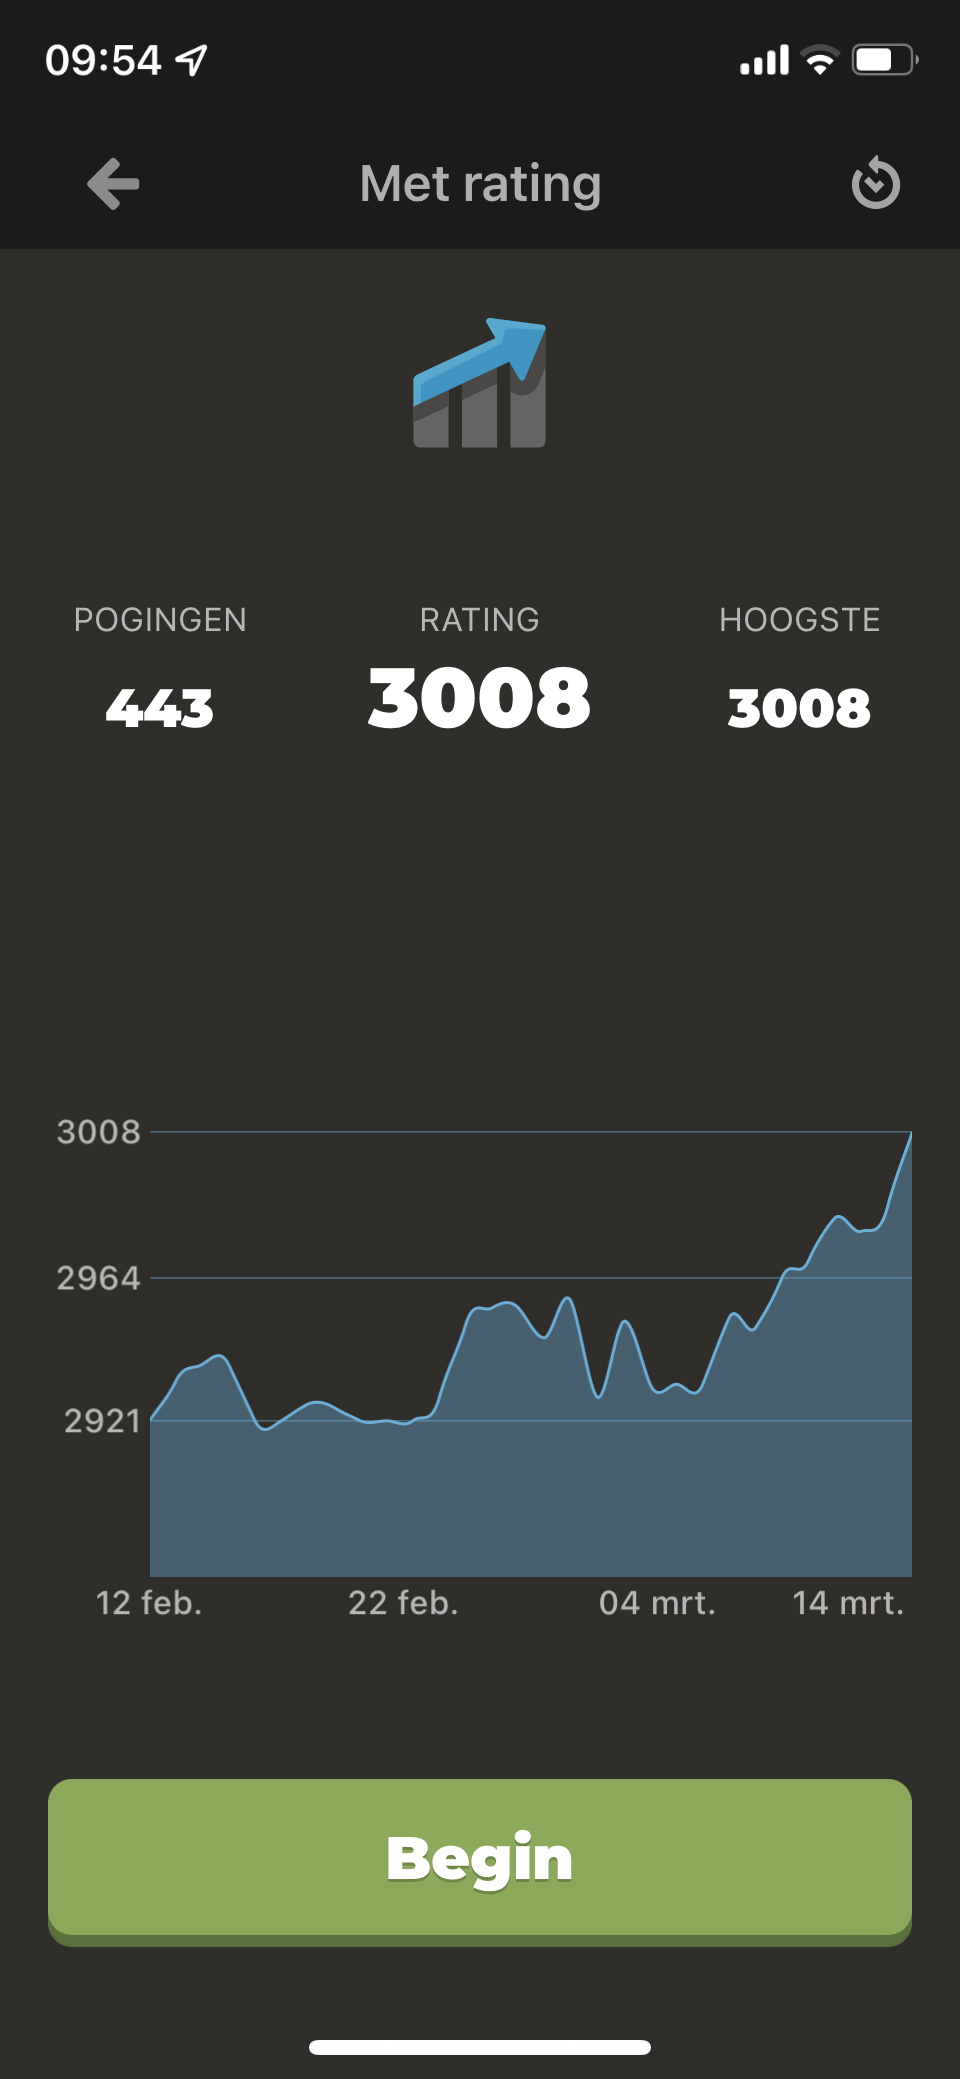 Race to 3200! Puzzle Rating on Chess.com 